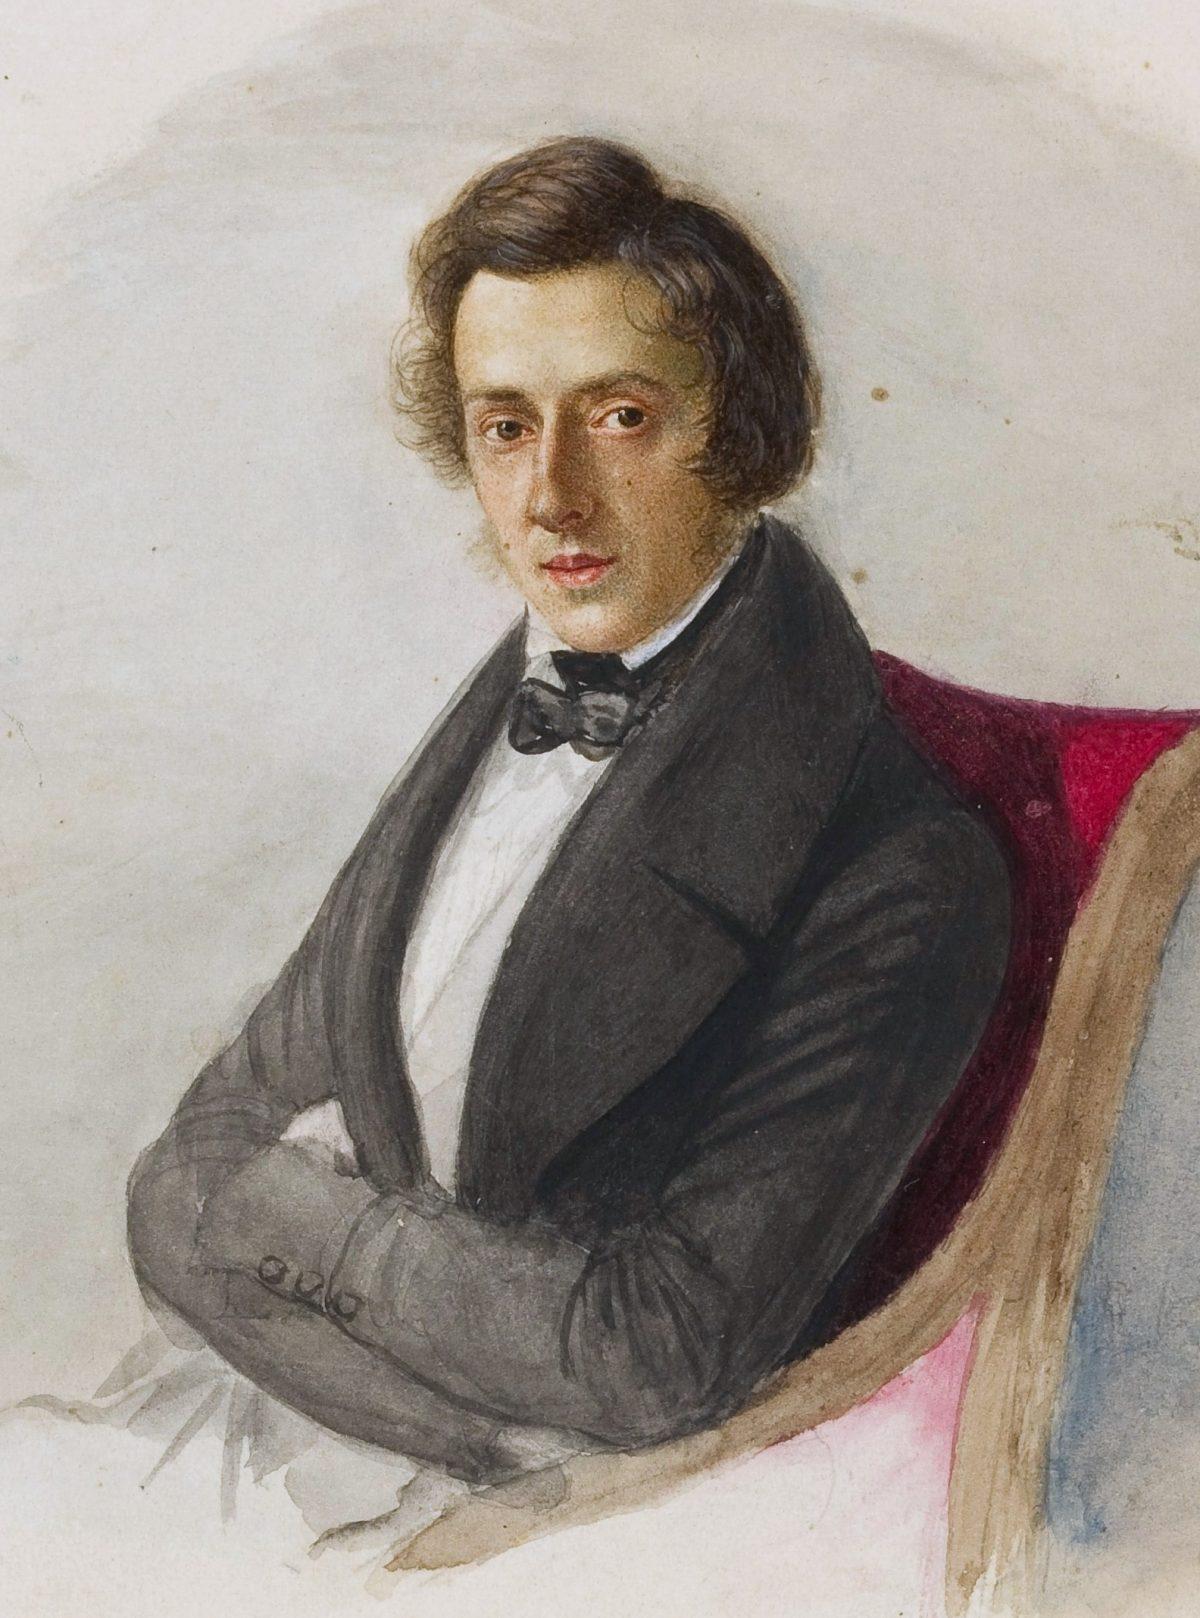 Chopin’s études, considered some of the most challenging pieces in the piano repertoire, are now being played by children. Portrait of Chopin, 1835, by his fiancée Maria Wodzinska. (Public Domain)